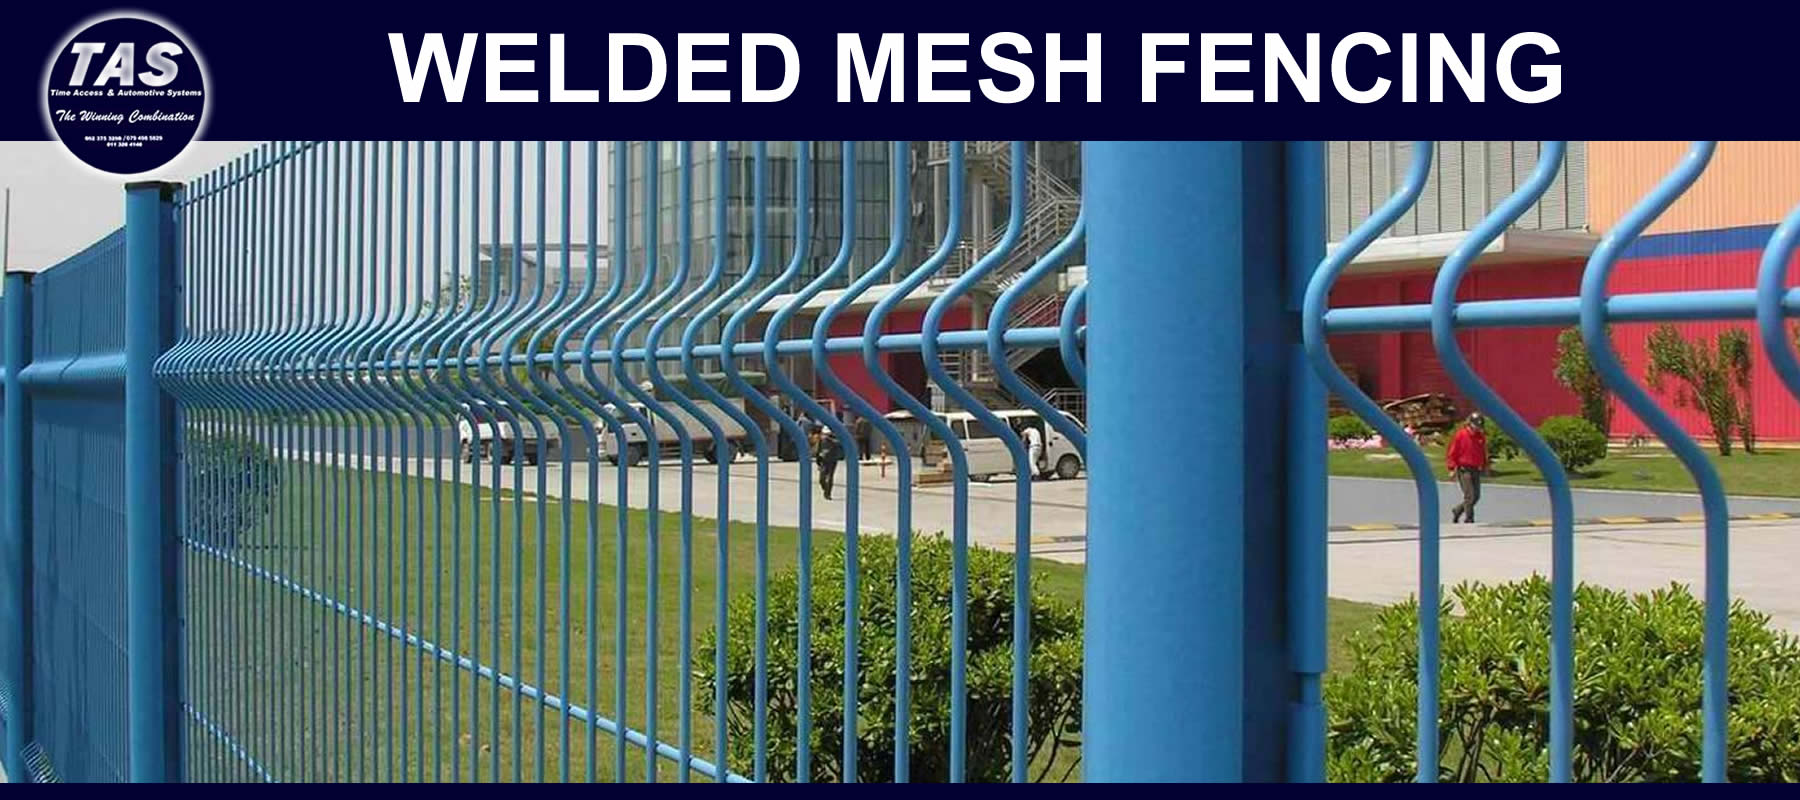 Welded Mesh fencing security control banner